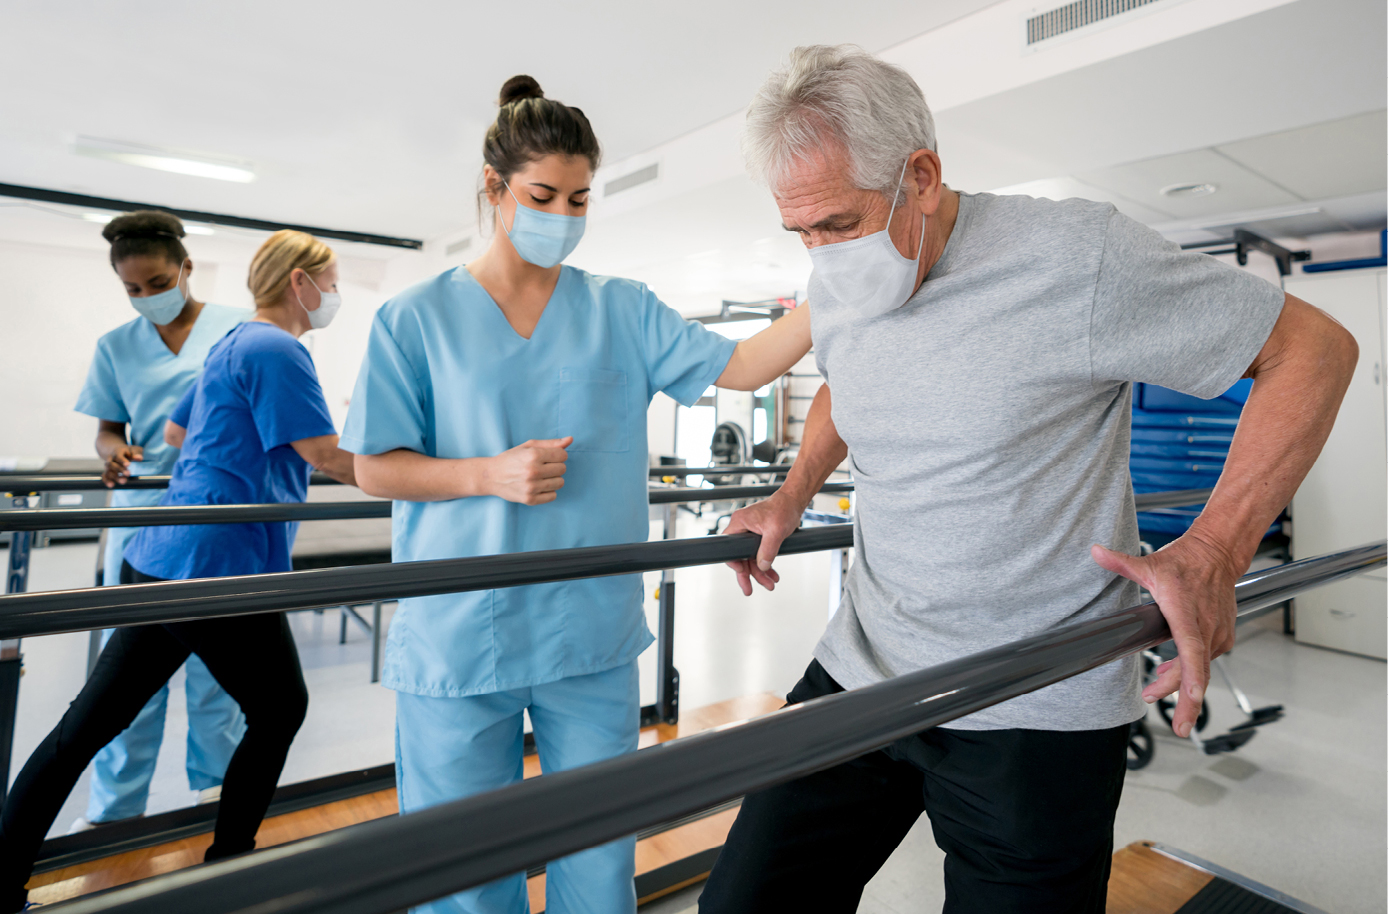 A man holds parallel bars for support during physical therapy. A therapist in scrubs stands nearby to spot him. Both wear facial masks.